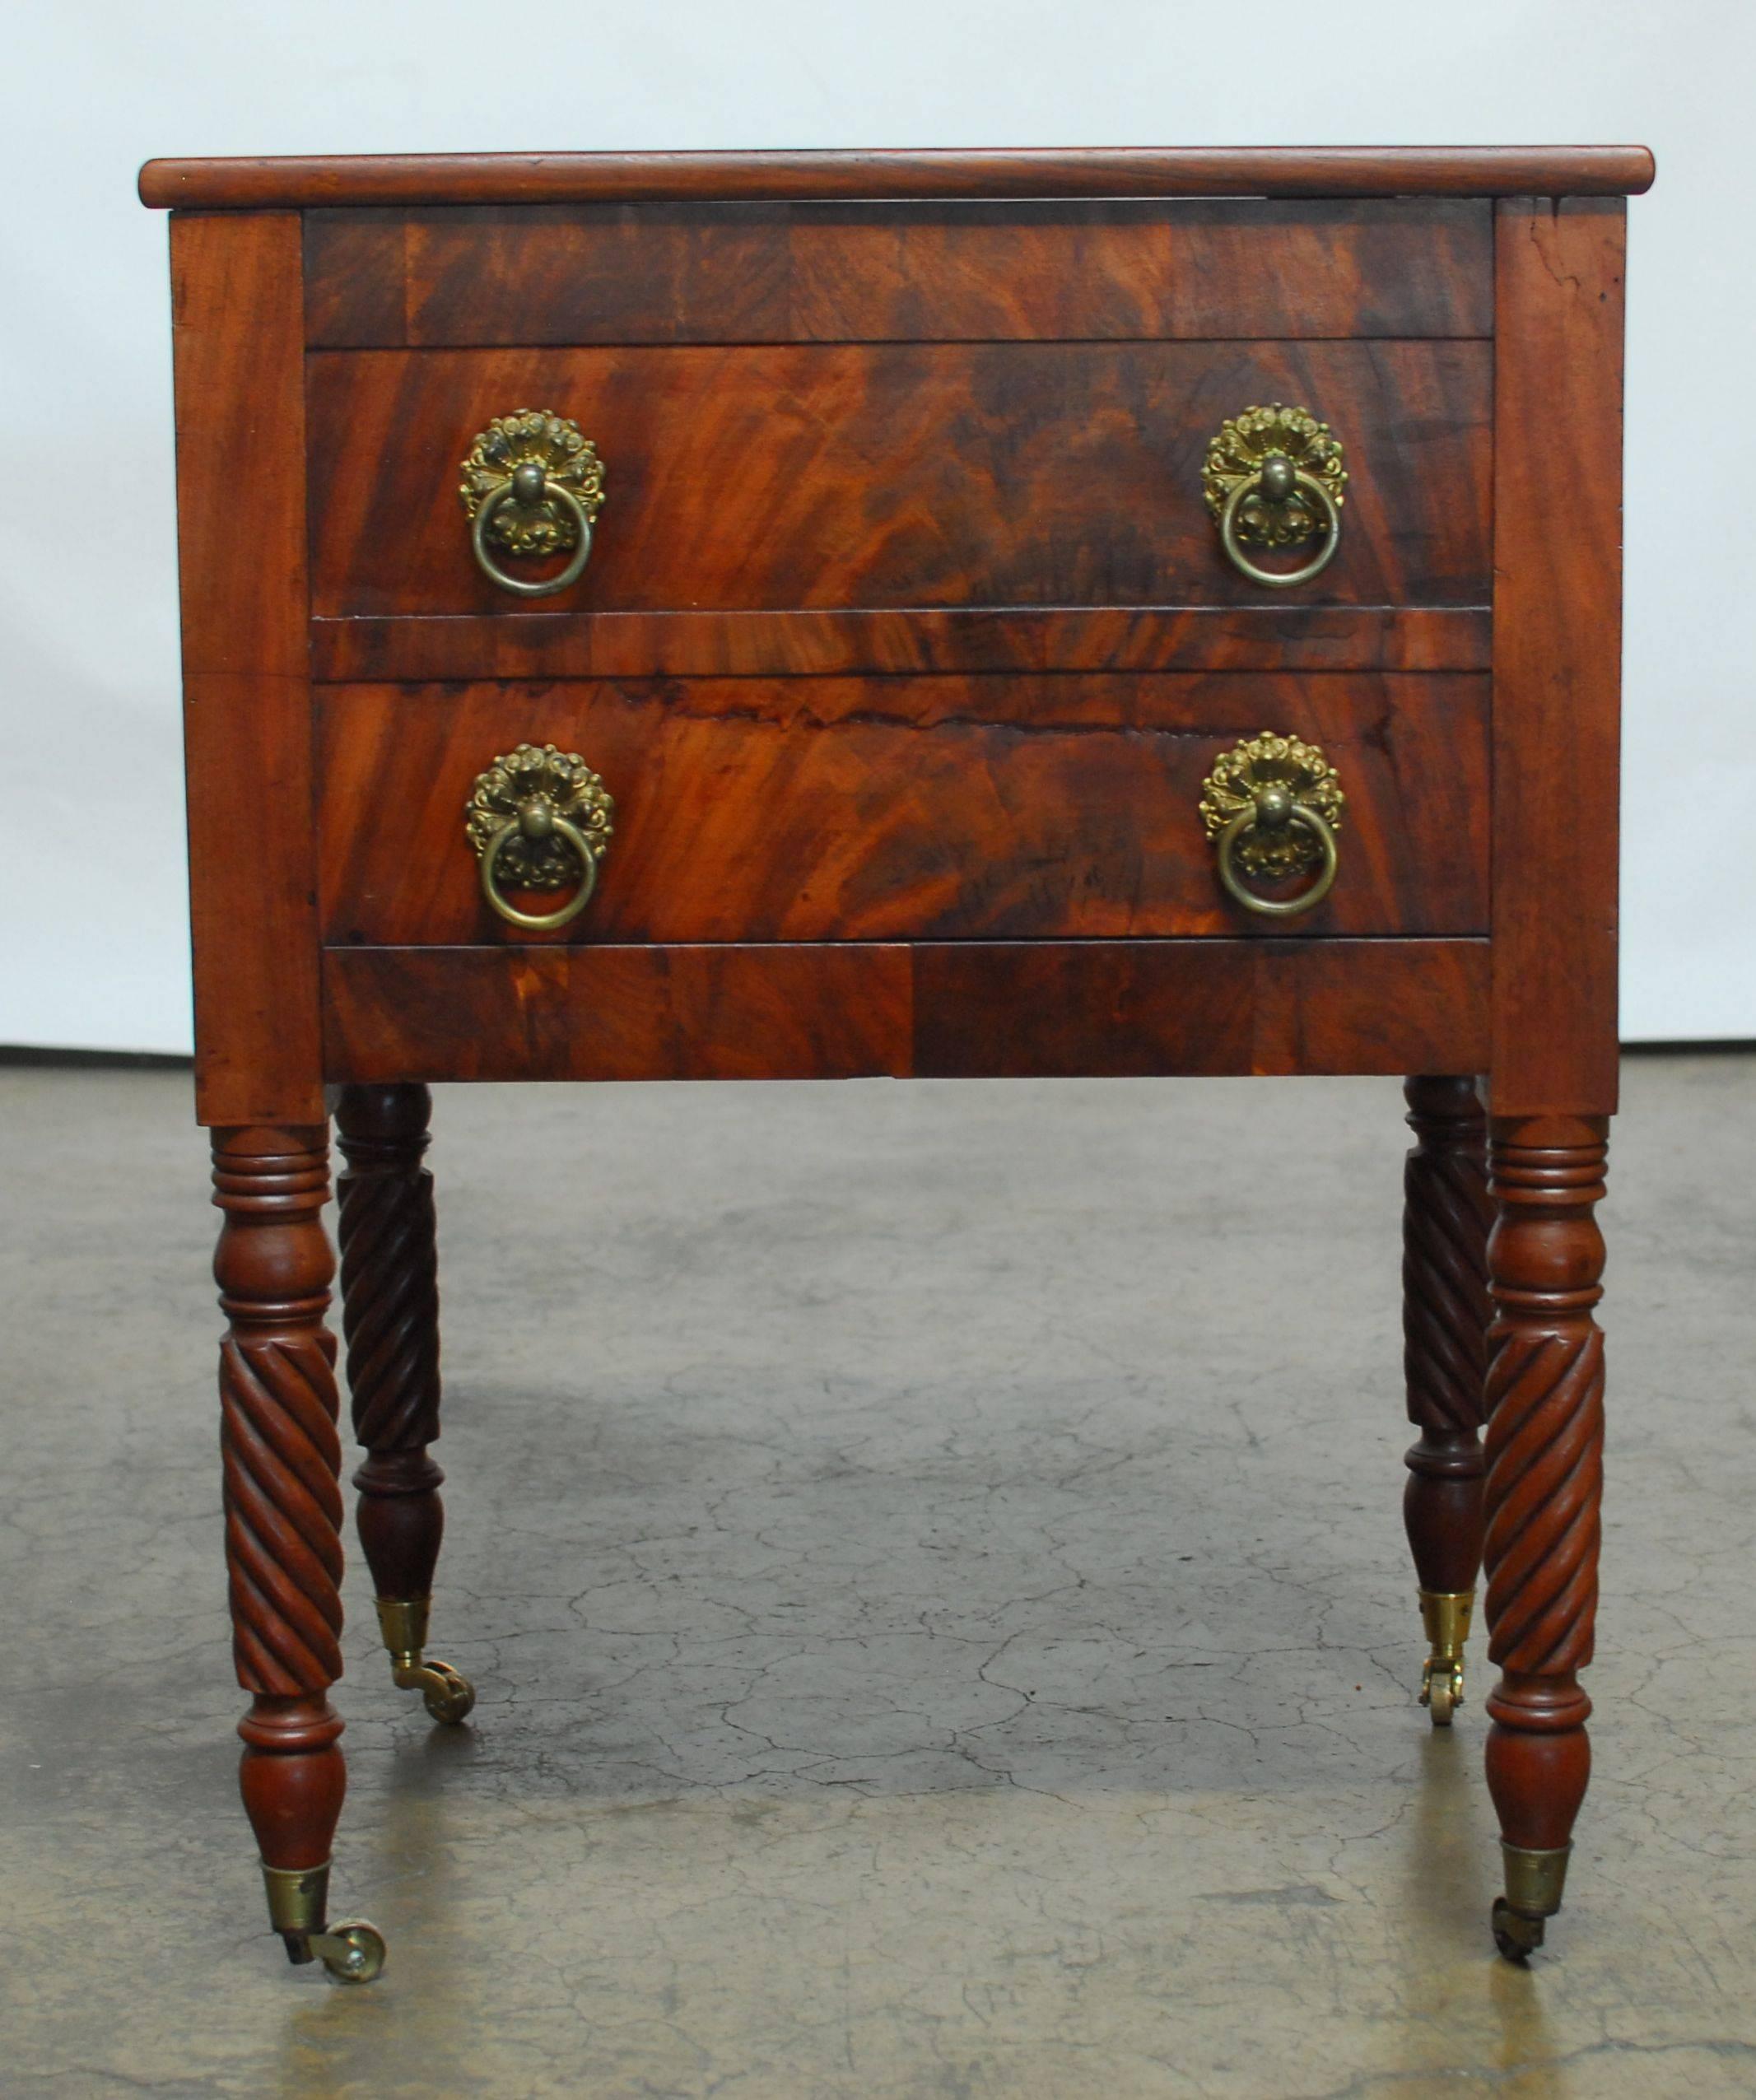 Federal period work table made of mahogany featuring barley twist legs. The case is fronted by two false dummy drawers and a hidden drawer on the bottom decorated with brass pull rings and round escutcheon. The top is hinged and opens to a large